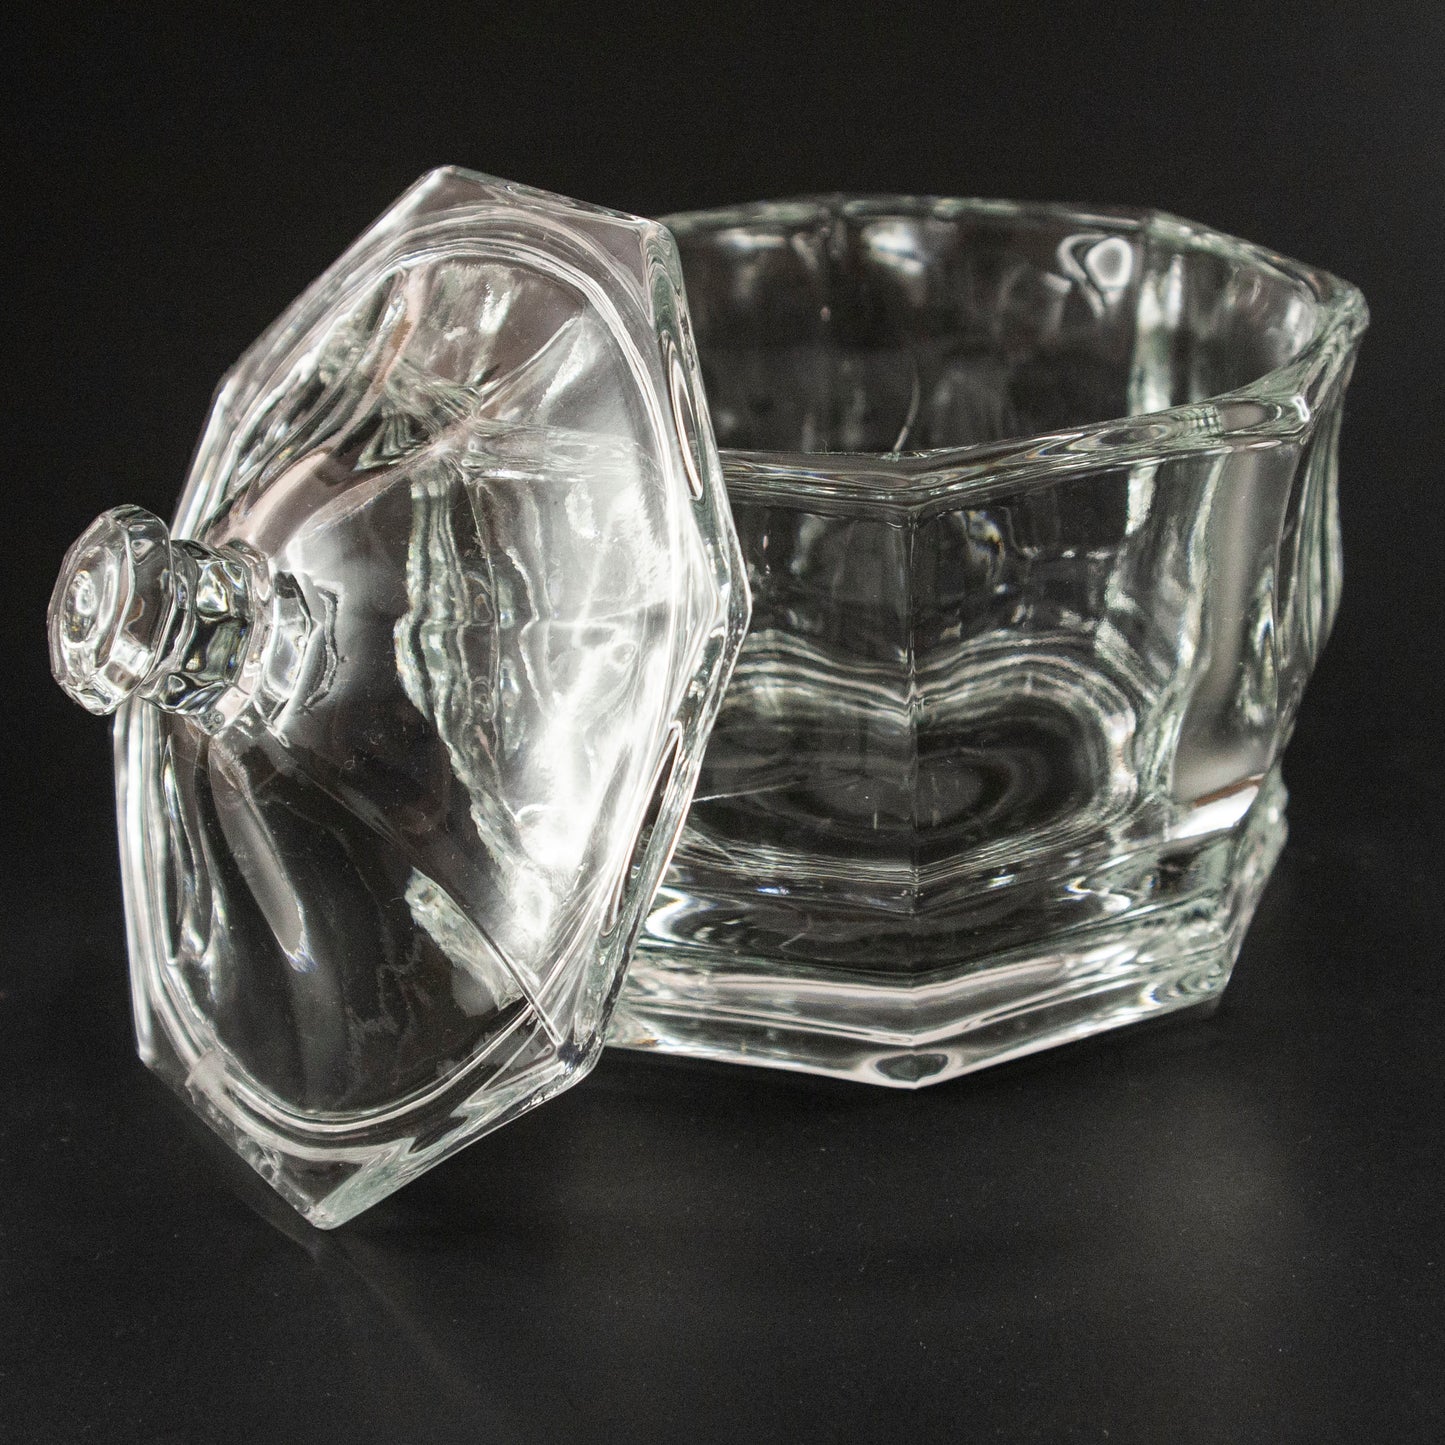 Octagonal Covered Candy Dish